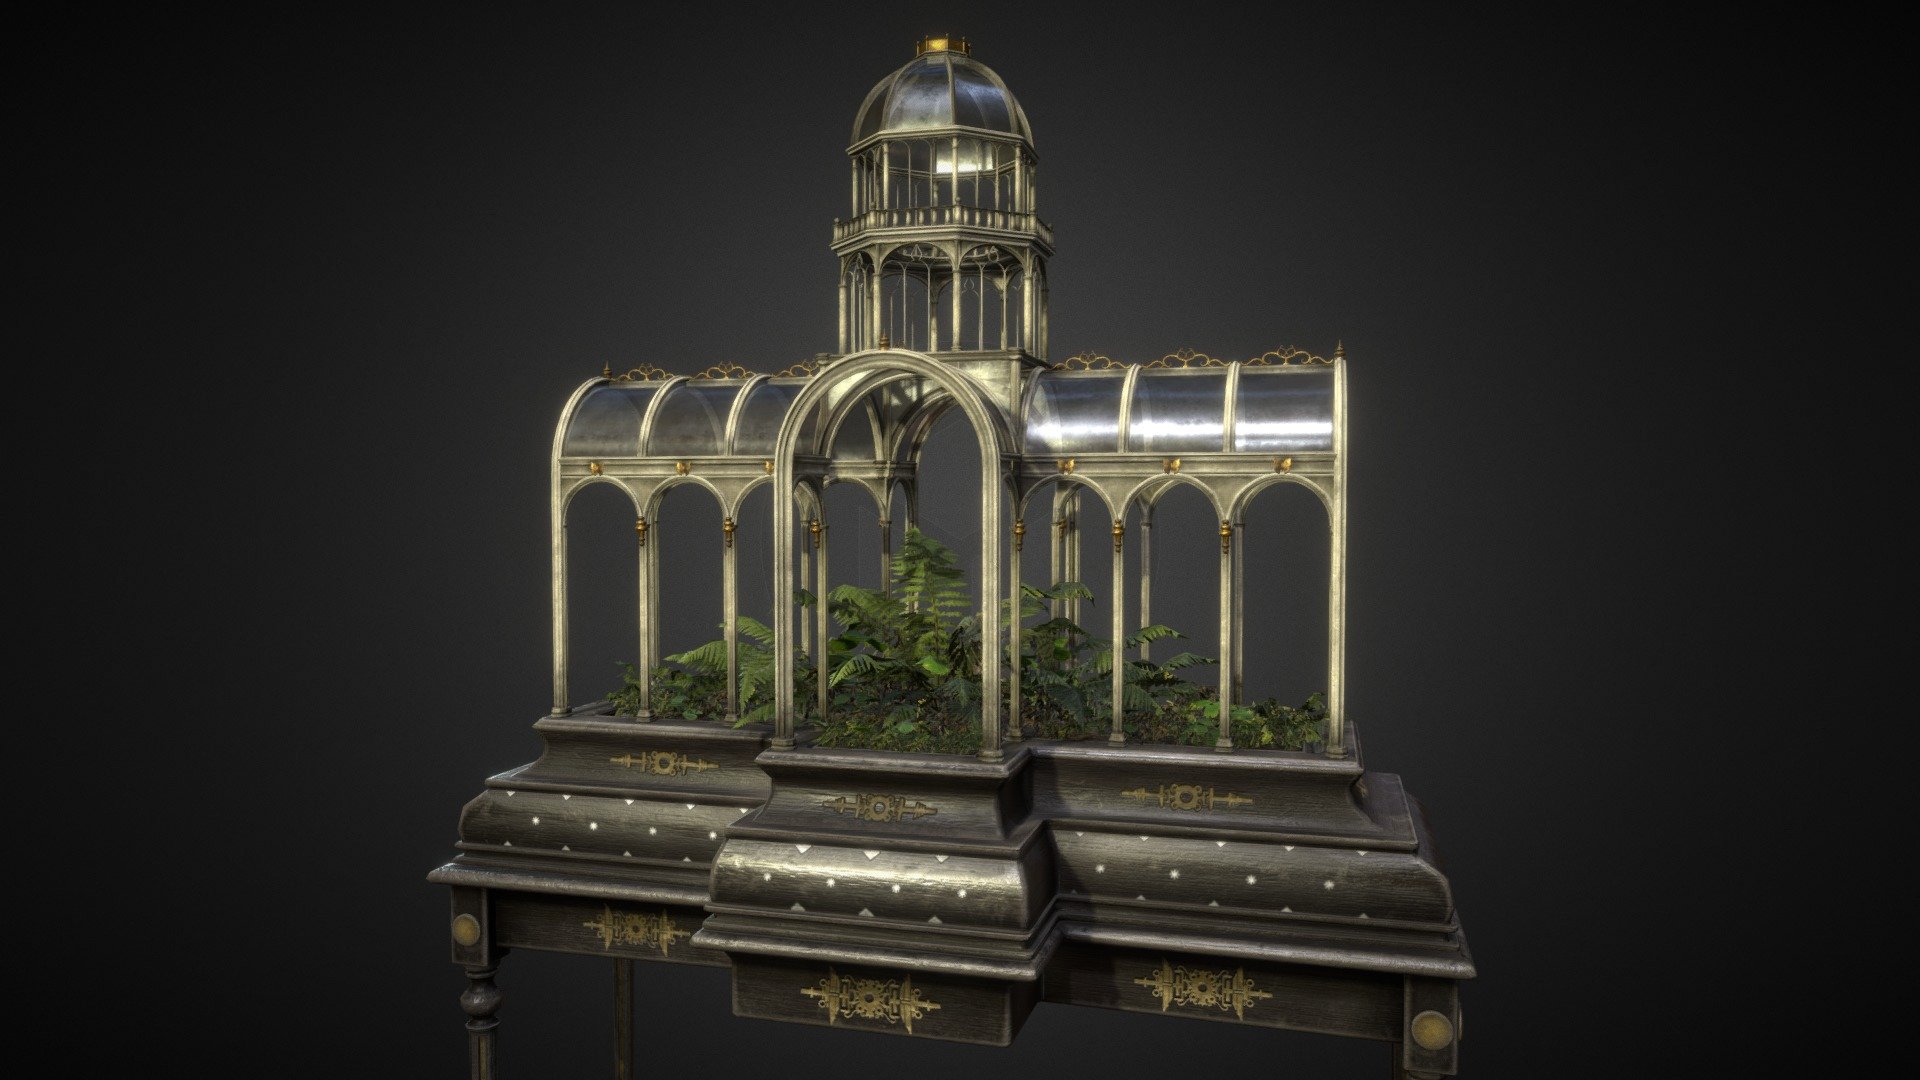 Story

This lovely Green House-inspired terrarium was created in 1869. After its original owner died, It was stored in a warehouse for many years gathering dust. The antique house decoration was recently found and restored, now it’s being auctioned off to the highest bidder.

Process

This is a game-res model created in Maya with a high-res normal map baked in substance painter. The materials were made using a PBR workflow to create the textures and all other maps present within the model.

Programs Utilized

Modeled in Maya

Textured in Substance Painter and Substance Designer

-Stencils made in Photoshop

Credit

Mauricio Guerra Perdomo: Models and materials

Textures.com: Fern textures and maps - Green House Terrarium - 3D model by Mauricio Perdomo (@MauricioPerdomo) 3d model